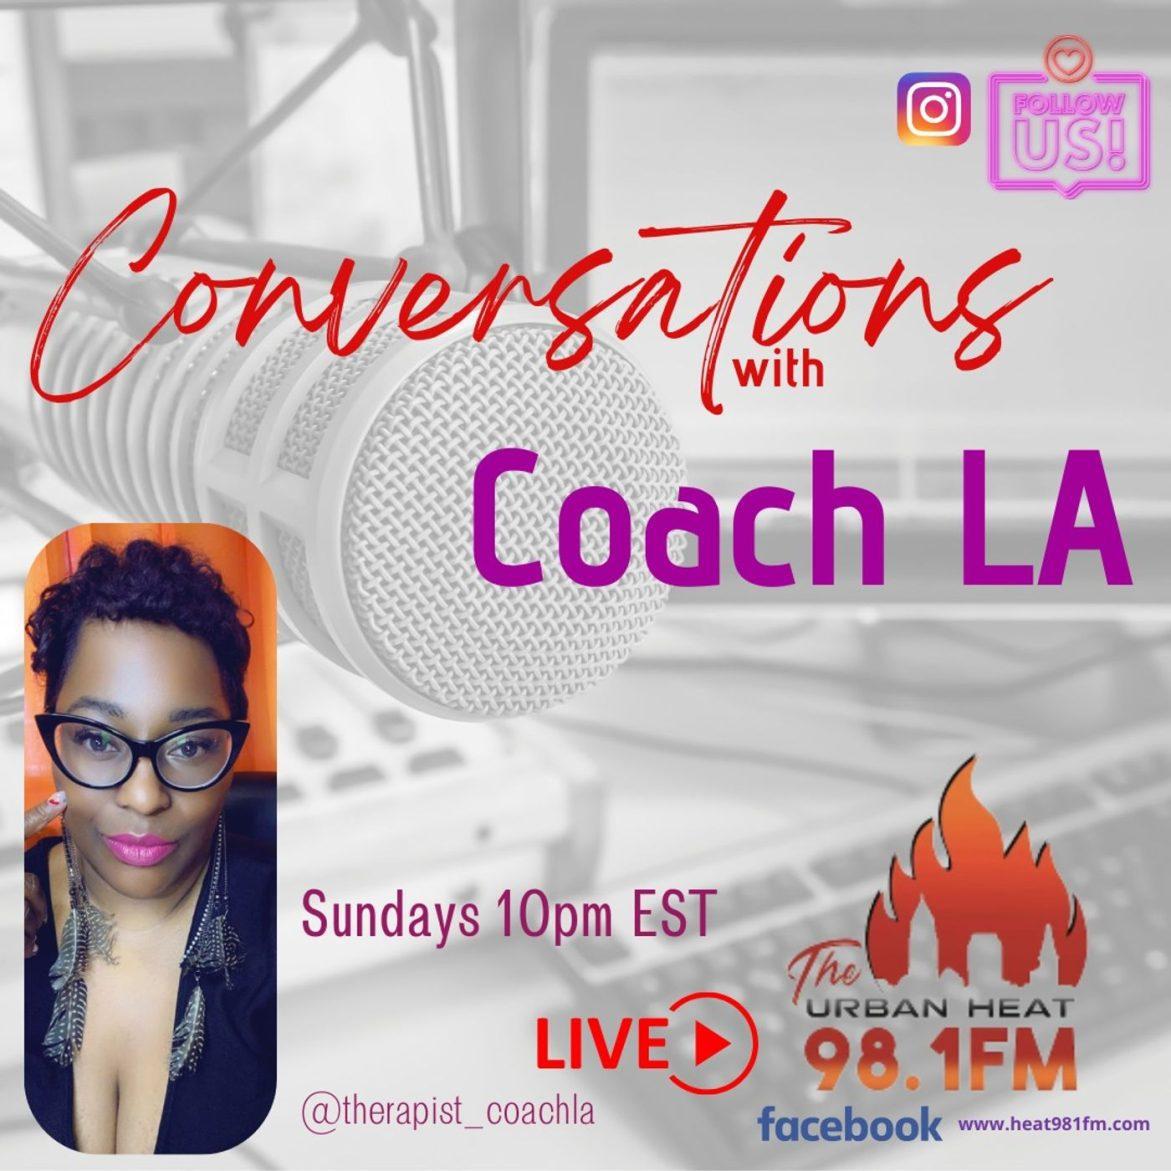 Black Podcasting - How to handle disappointment according to Coach LA